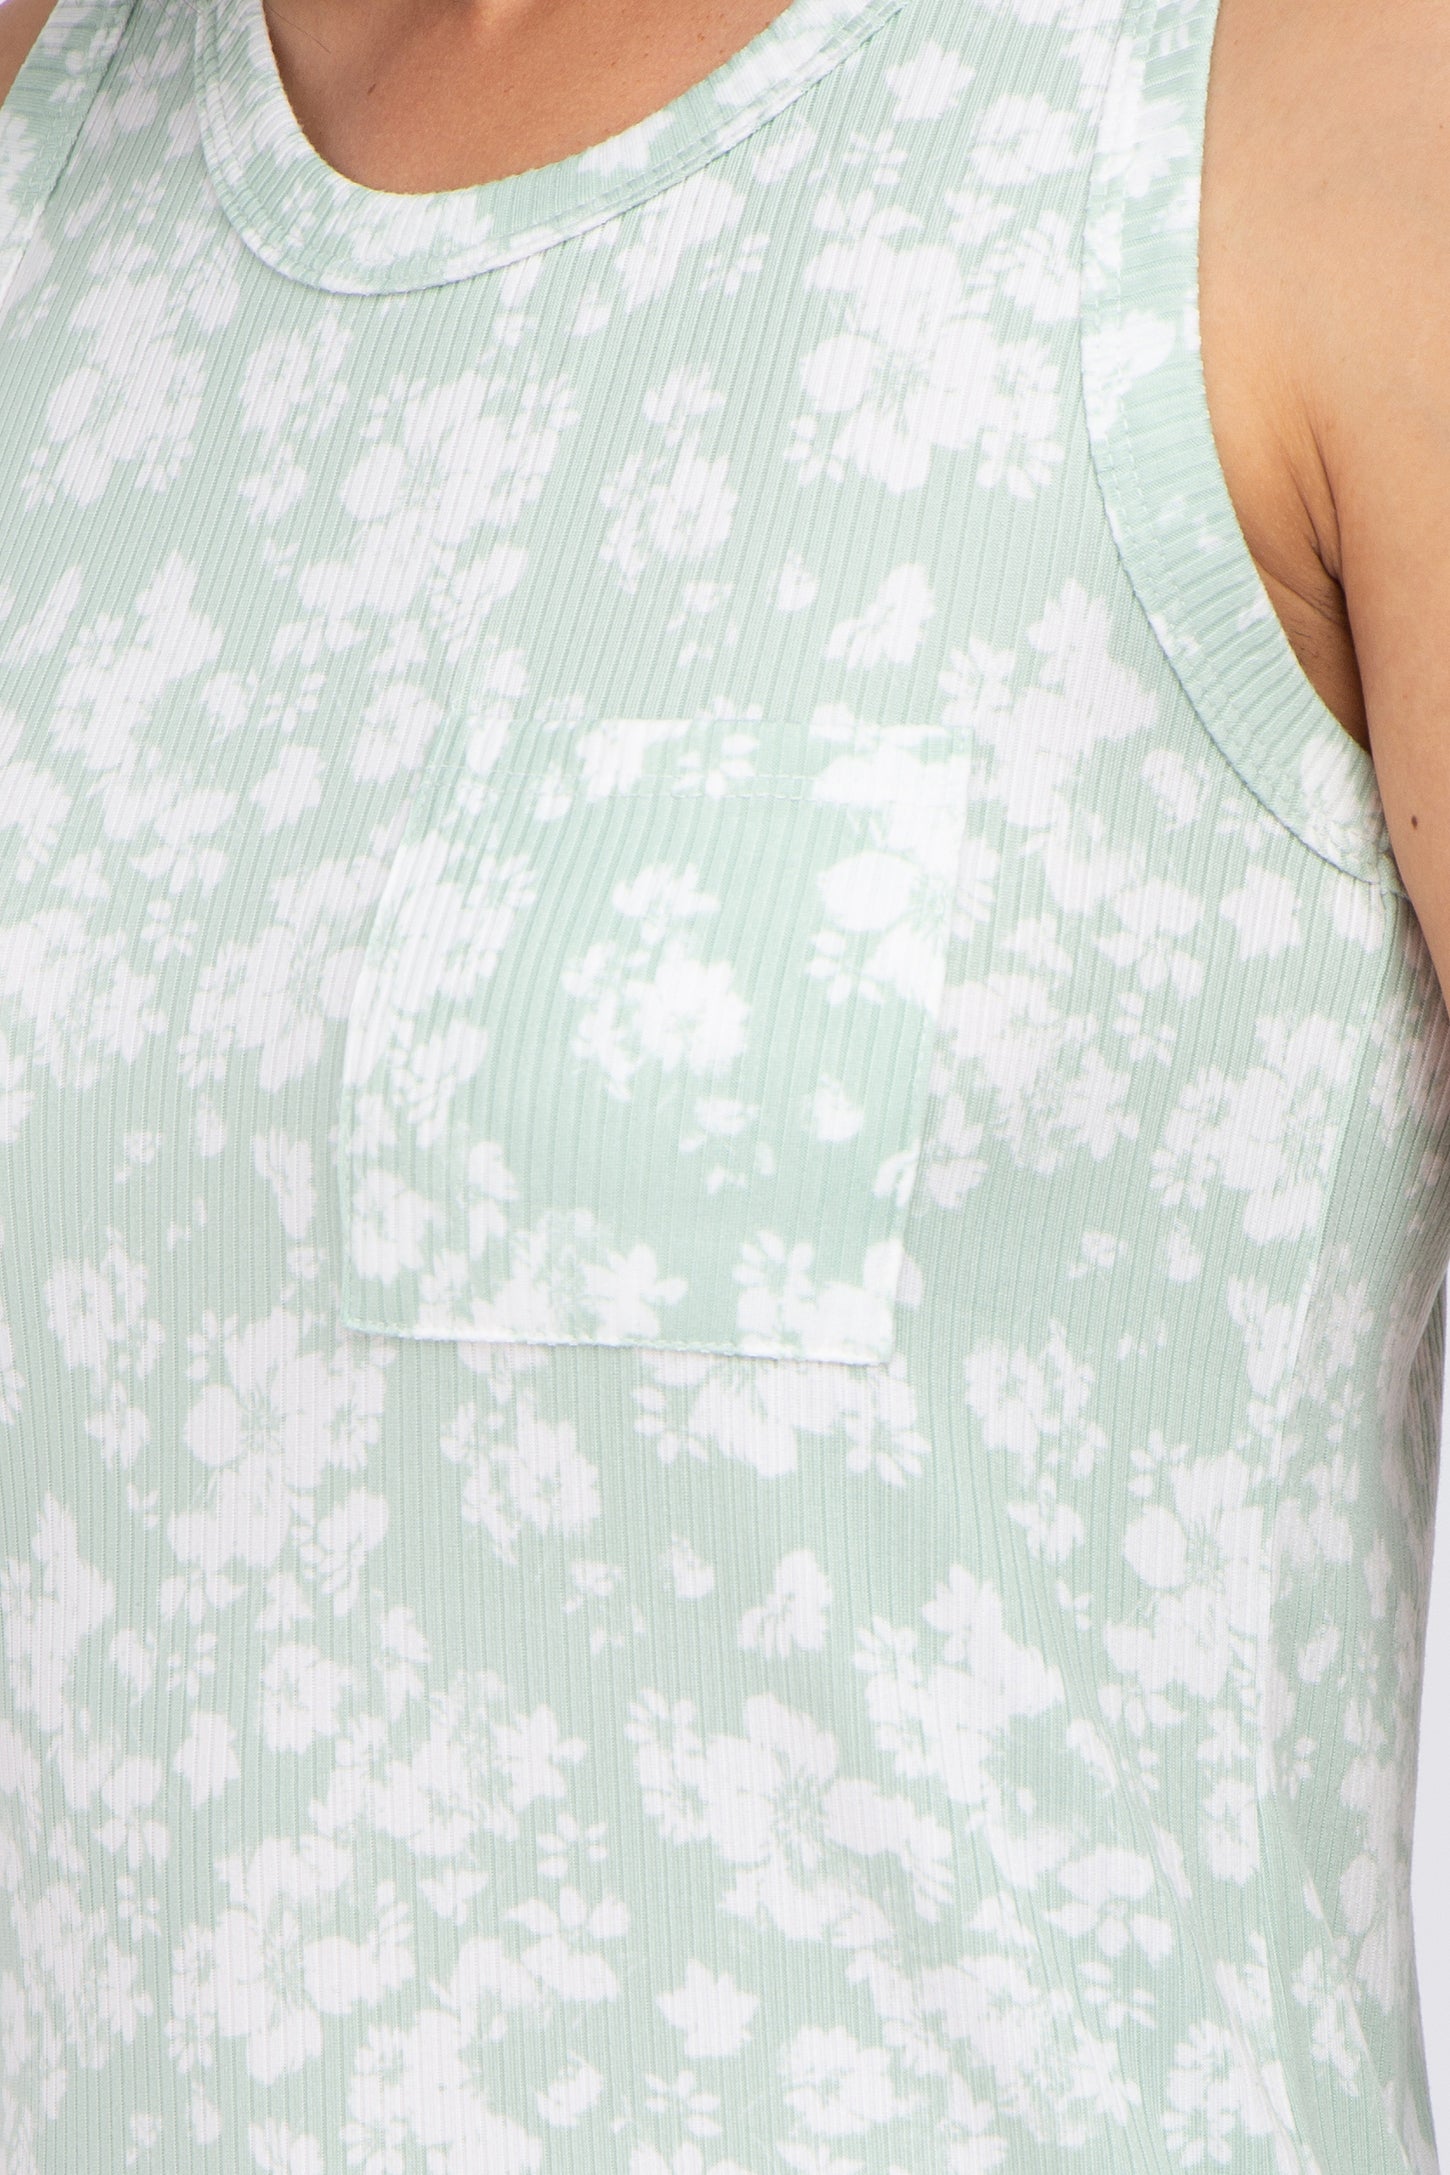 Mint Green Floral Ribbed Tank Top